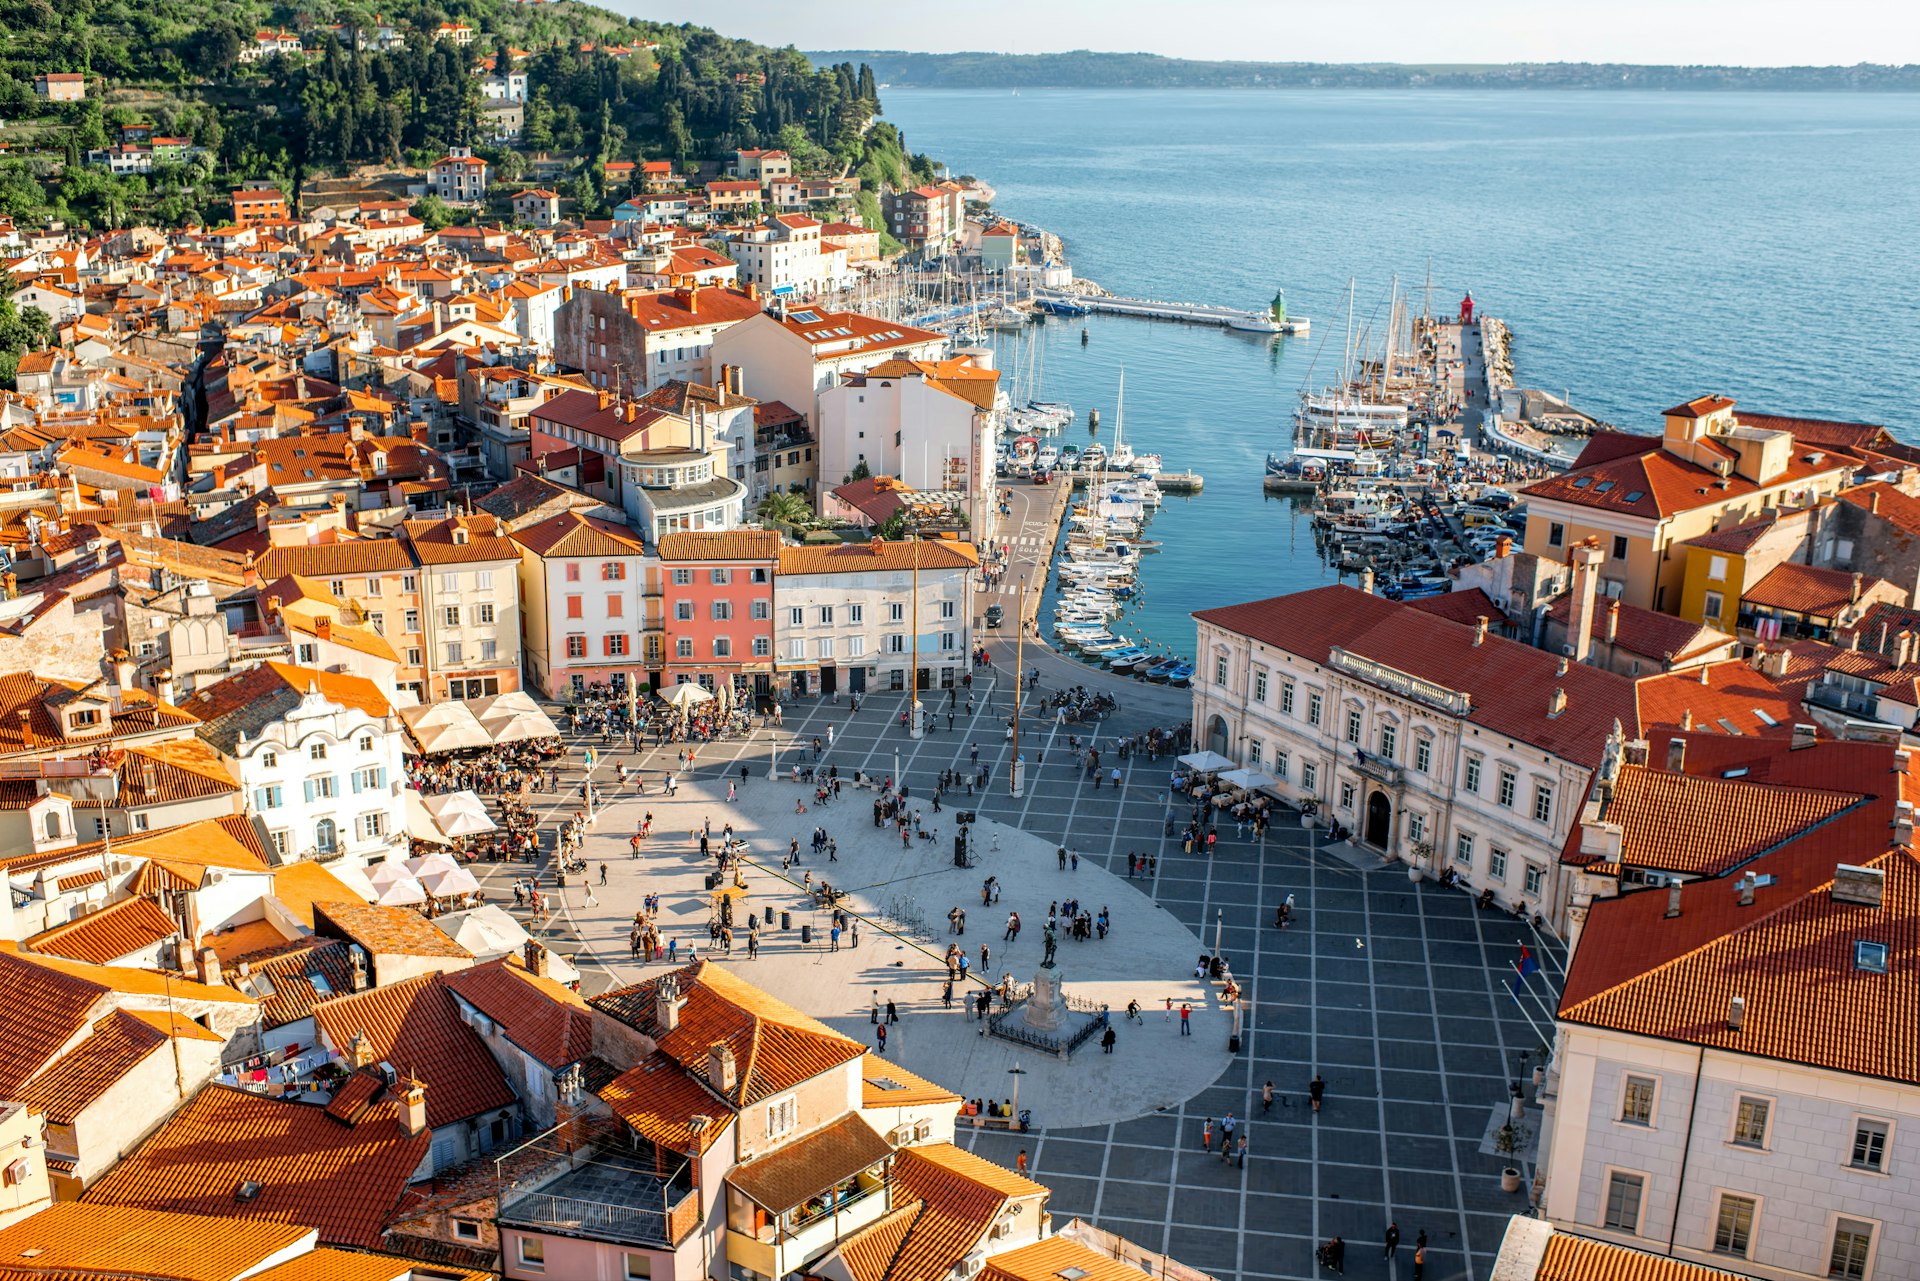 An aerial view of Piran and the ancient red-roofed buildings of its main square, with the Adriatic sea in the distance